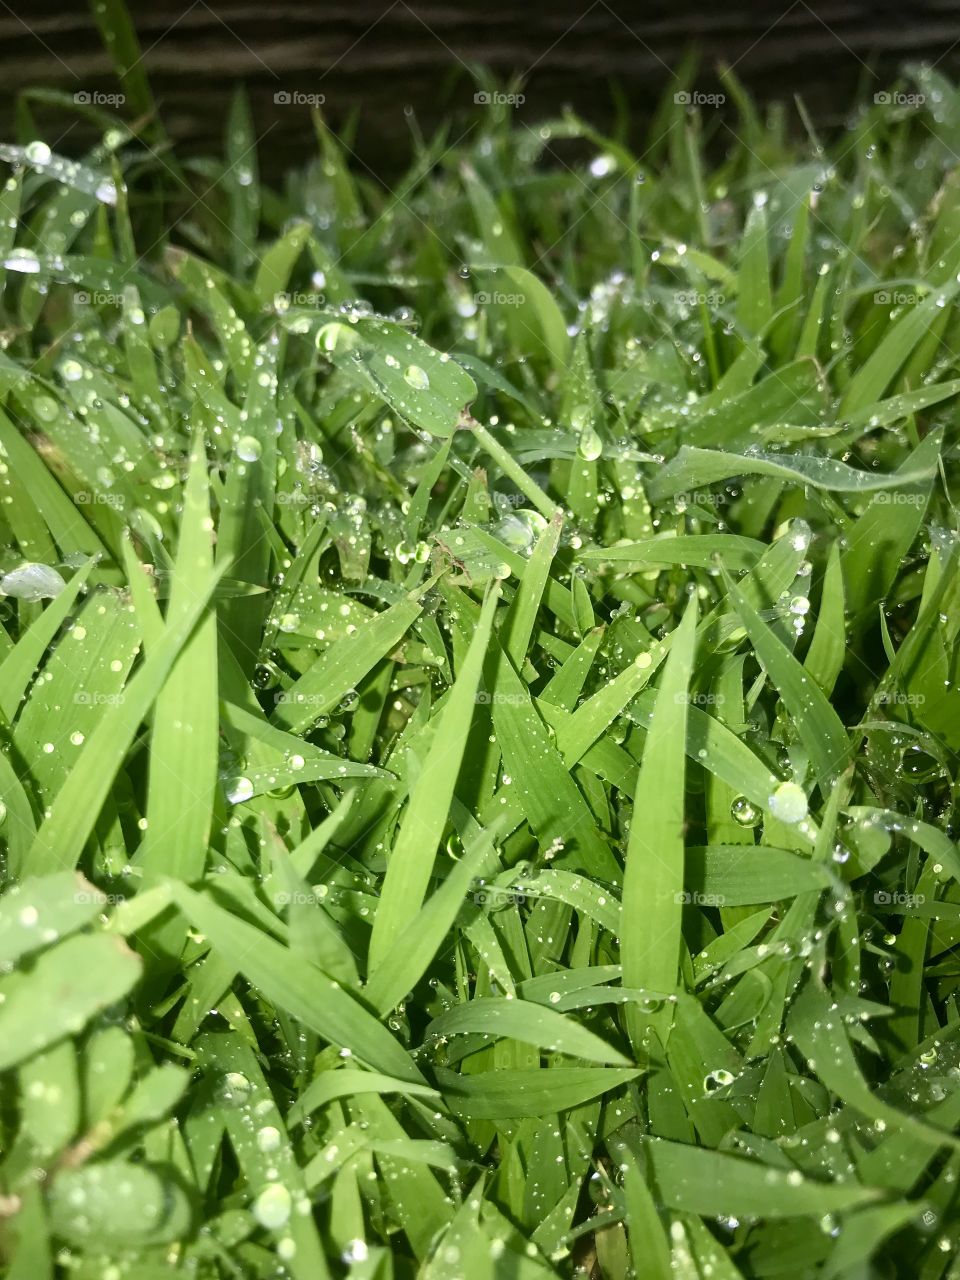 Dew covered grass 🌱